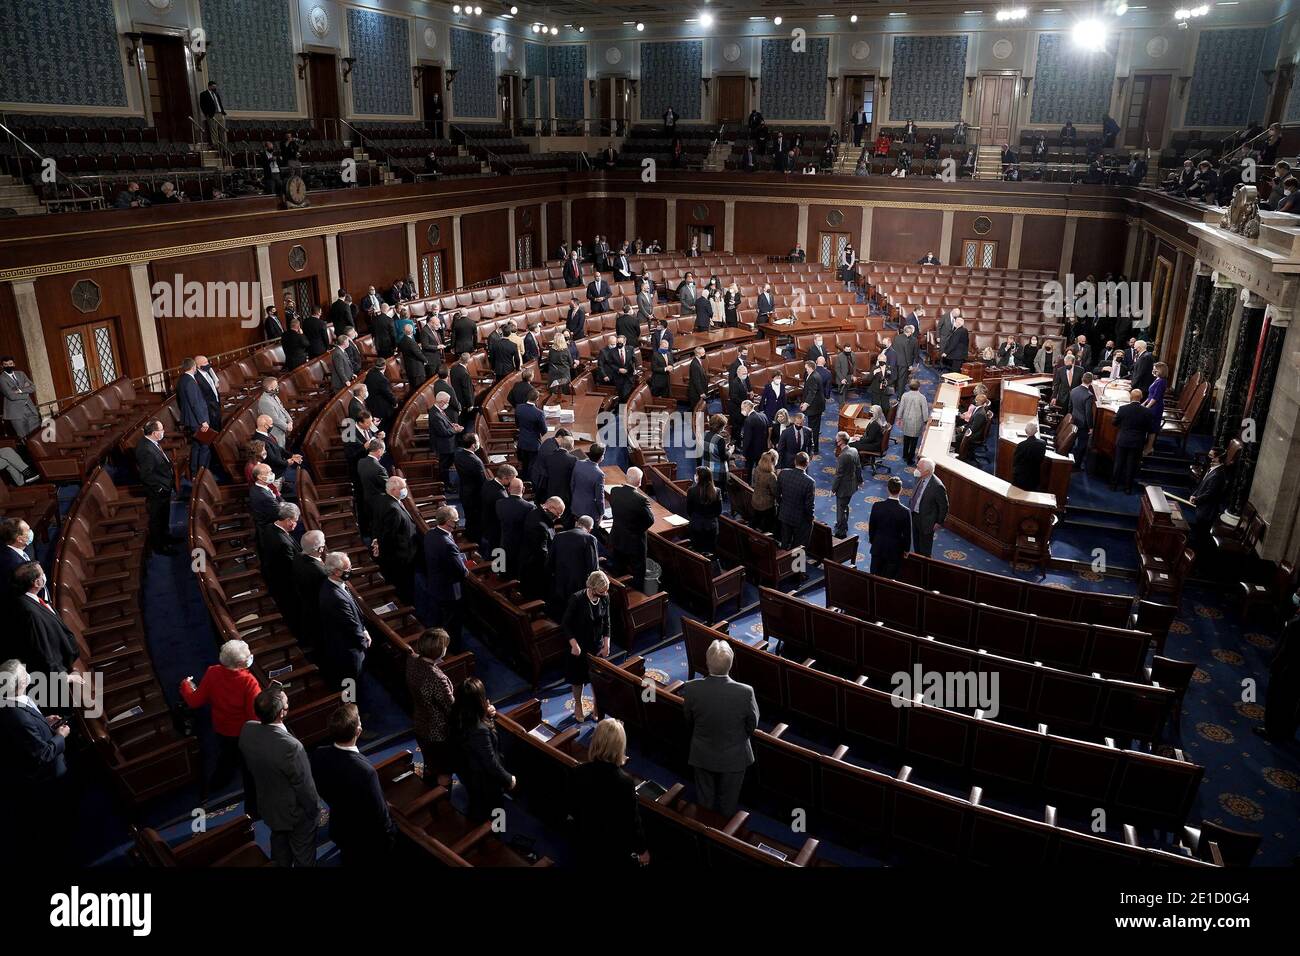 The House Chamber is seen during a joint session of Congress to count the Electoral College votes from the 2020 presidential election on Wednesday, January 6, 2021.Credit: Greg Nash/Pool via CNP /MediaPunch Stock Photo